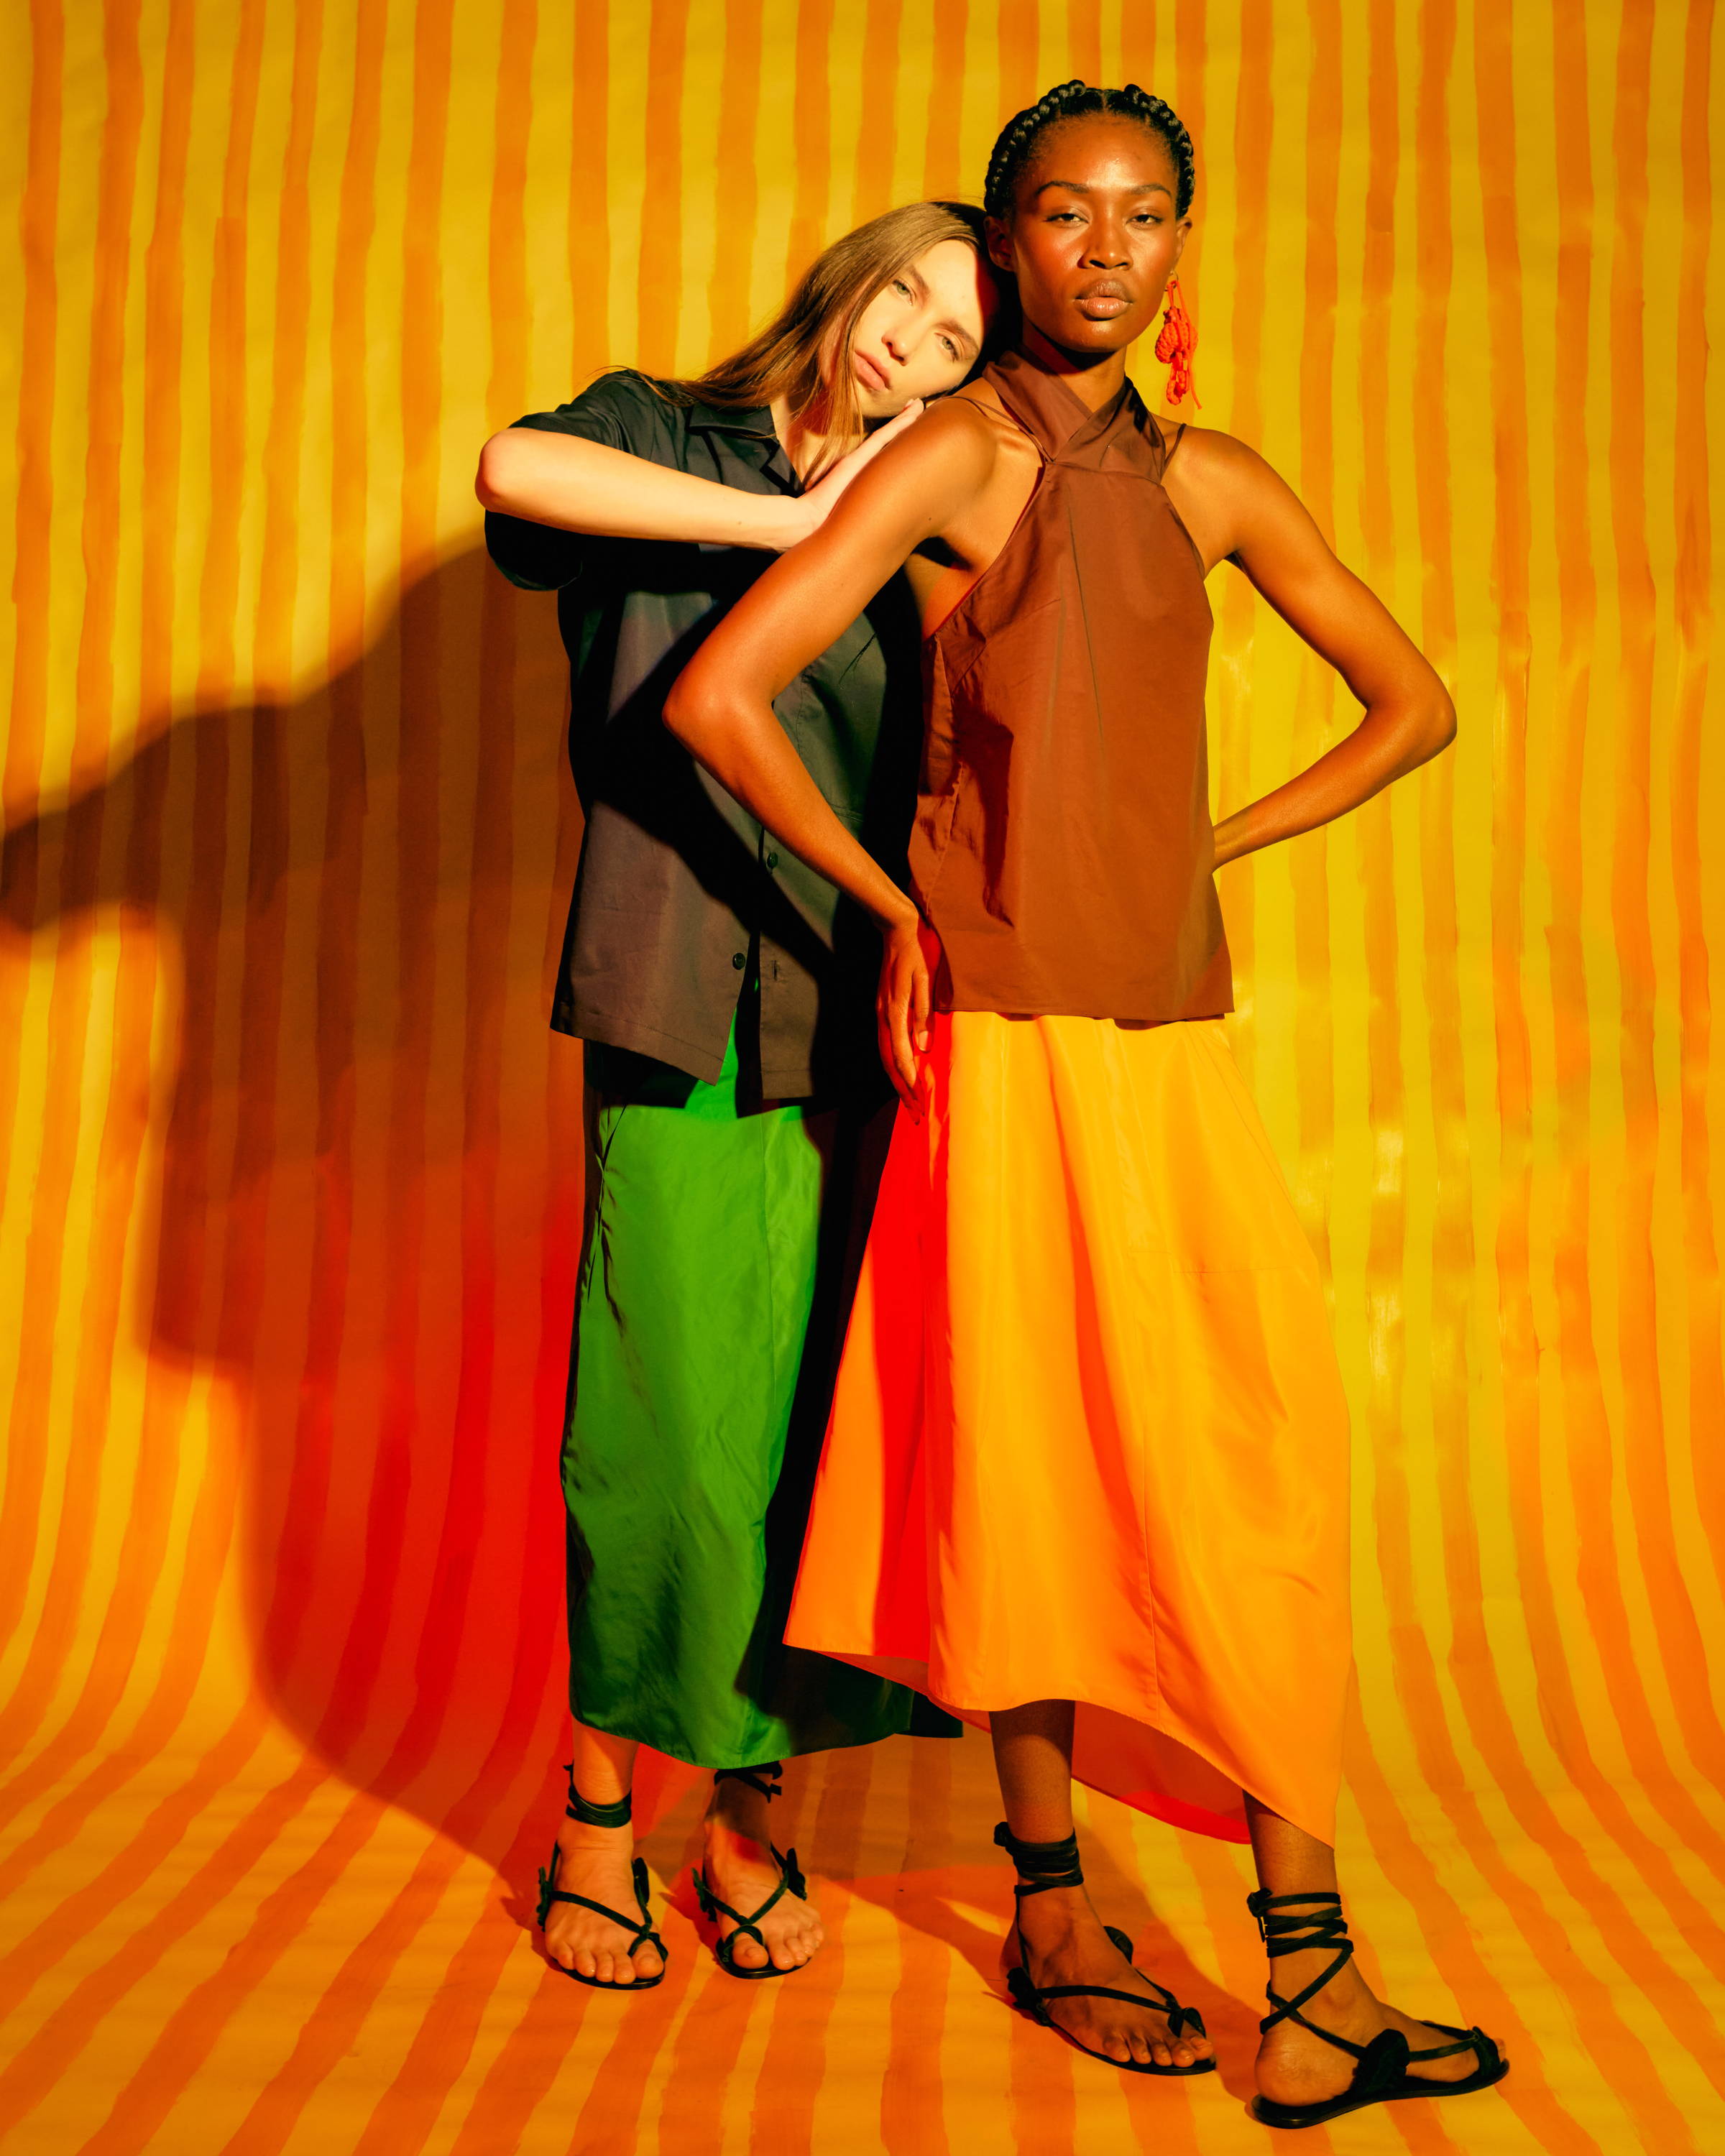 two models in front of striped background